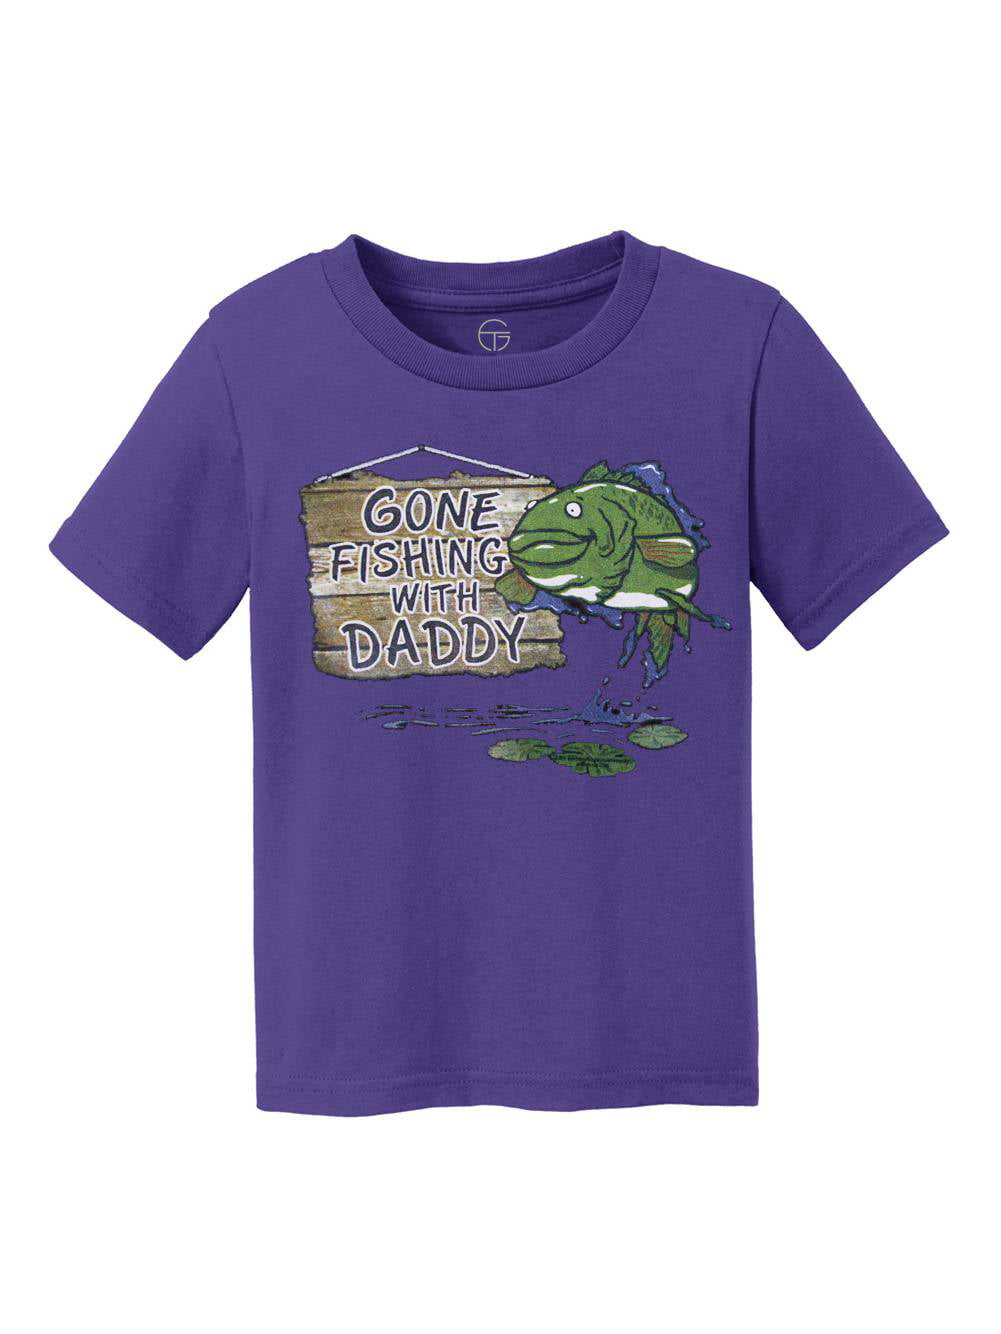 Gone Fishing With Daddy Kids Cotton T-Shirt - Athletic Heather - X-Large 